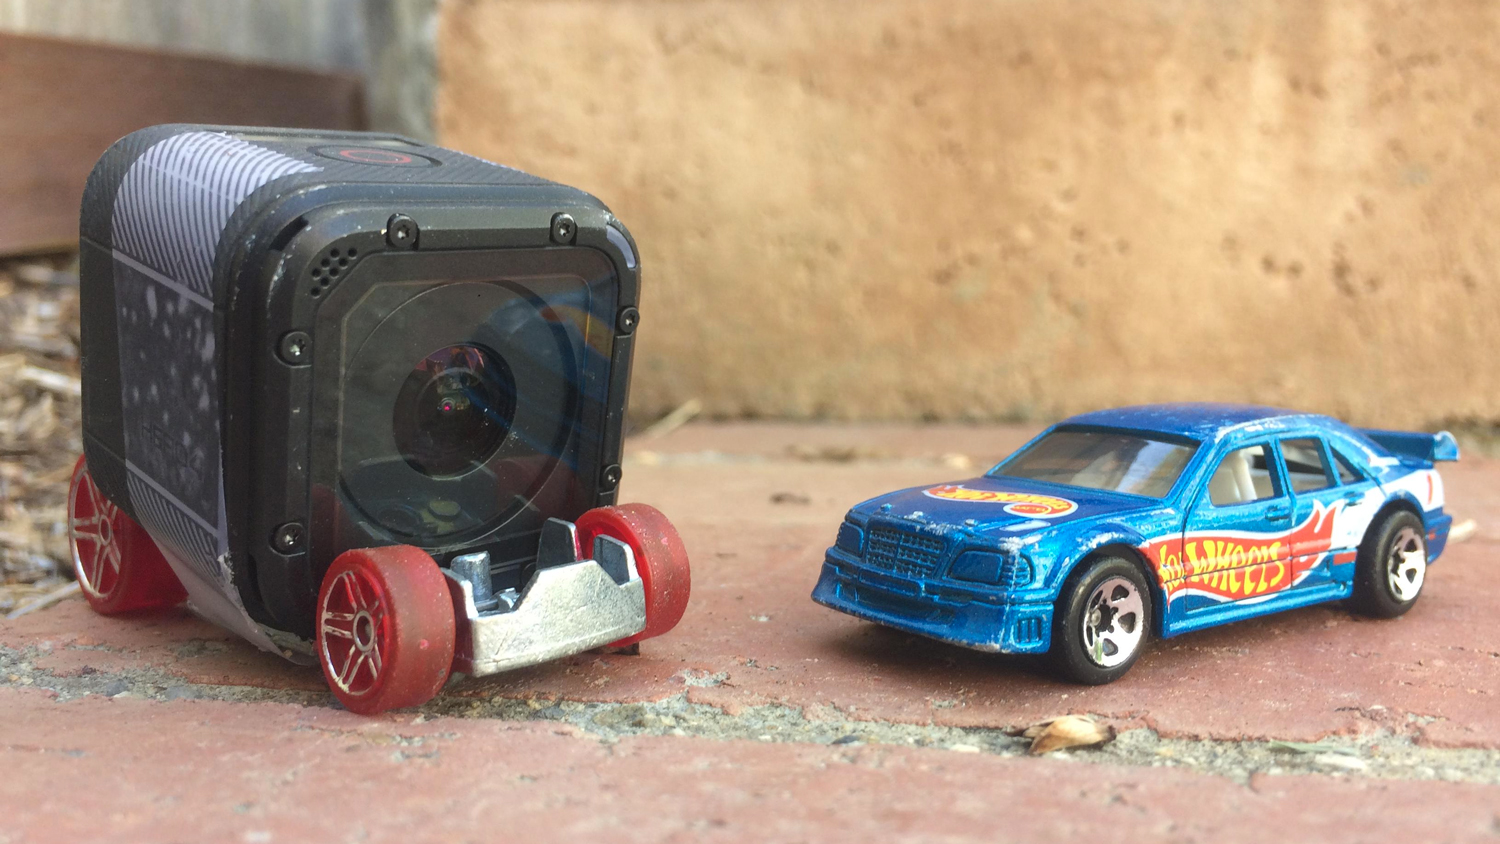 Putting A GoPro On A Hot Wheels Track Is The Safest Way To Become A Stunt Driver